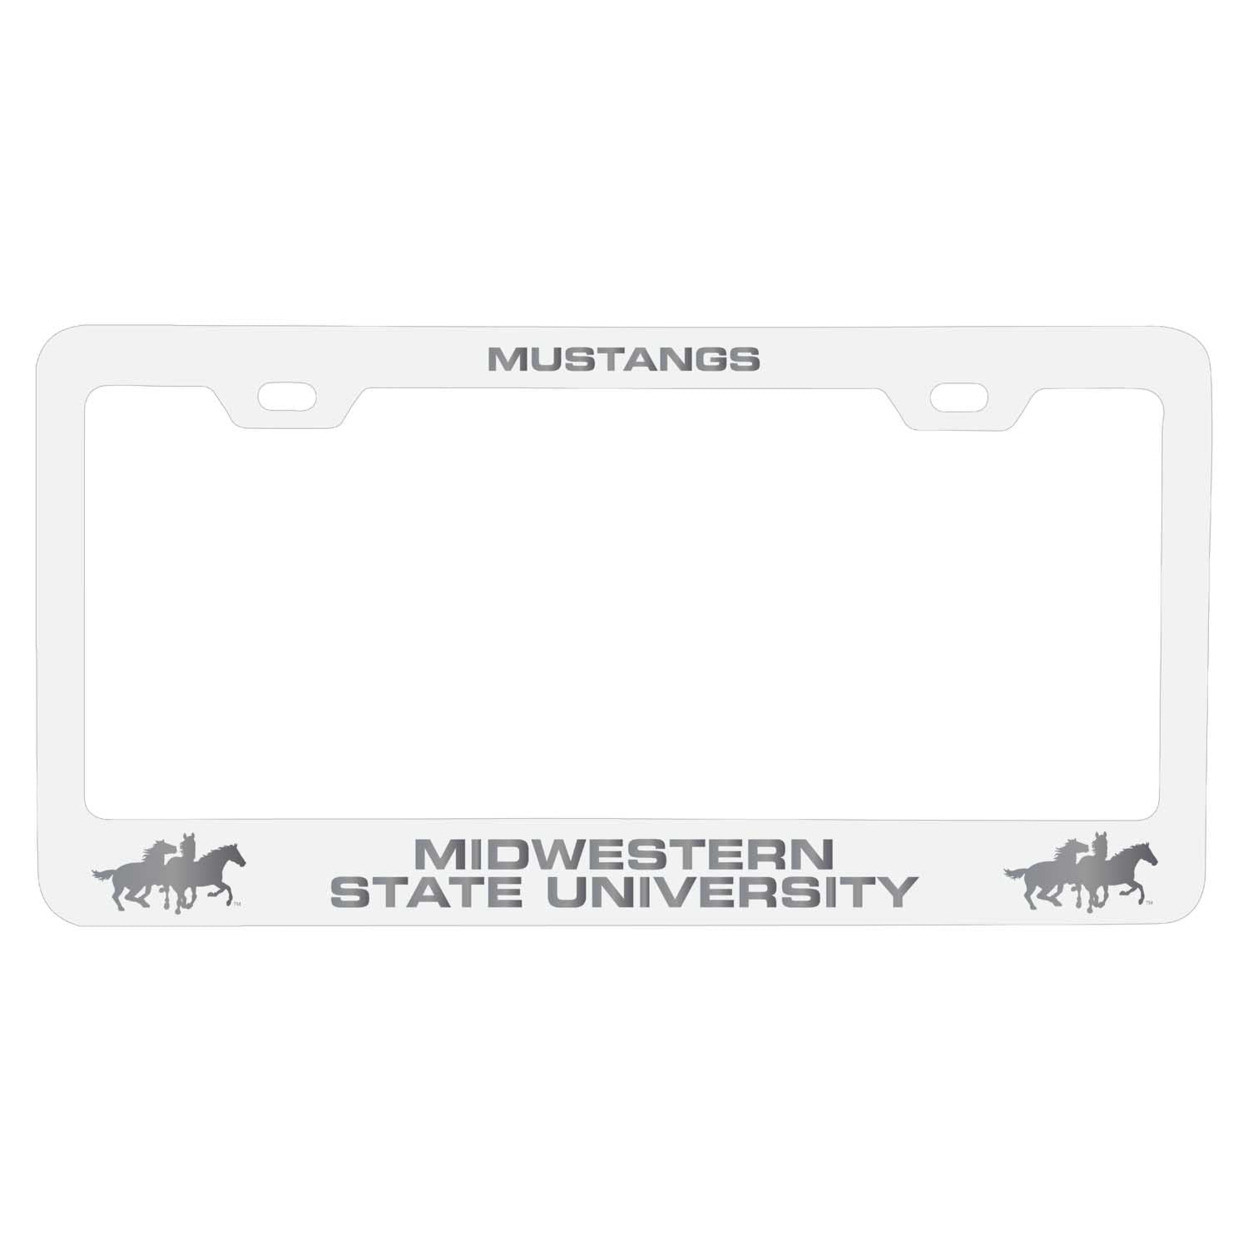 Midwestern State University Mustangs Etched Metal License Plate Frame Choose Your Color